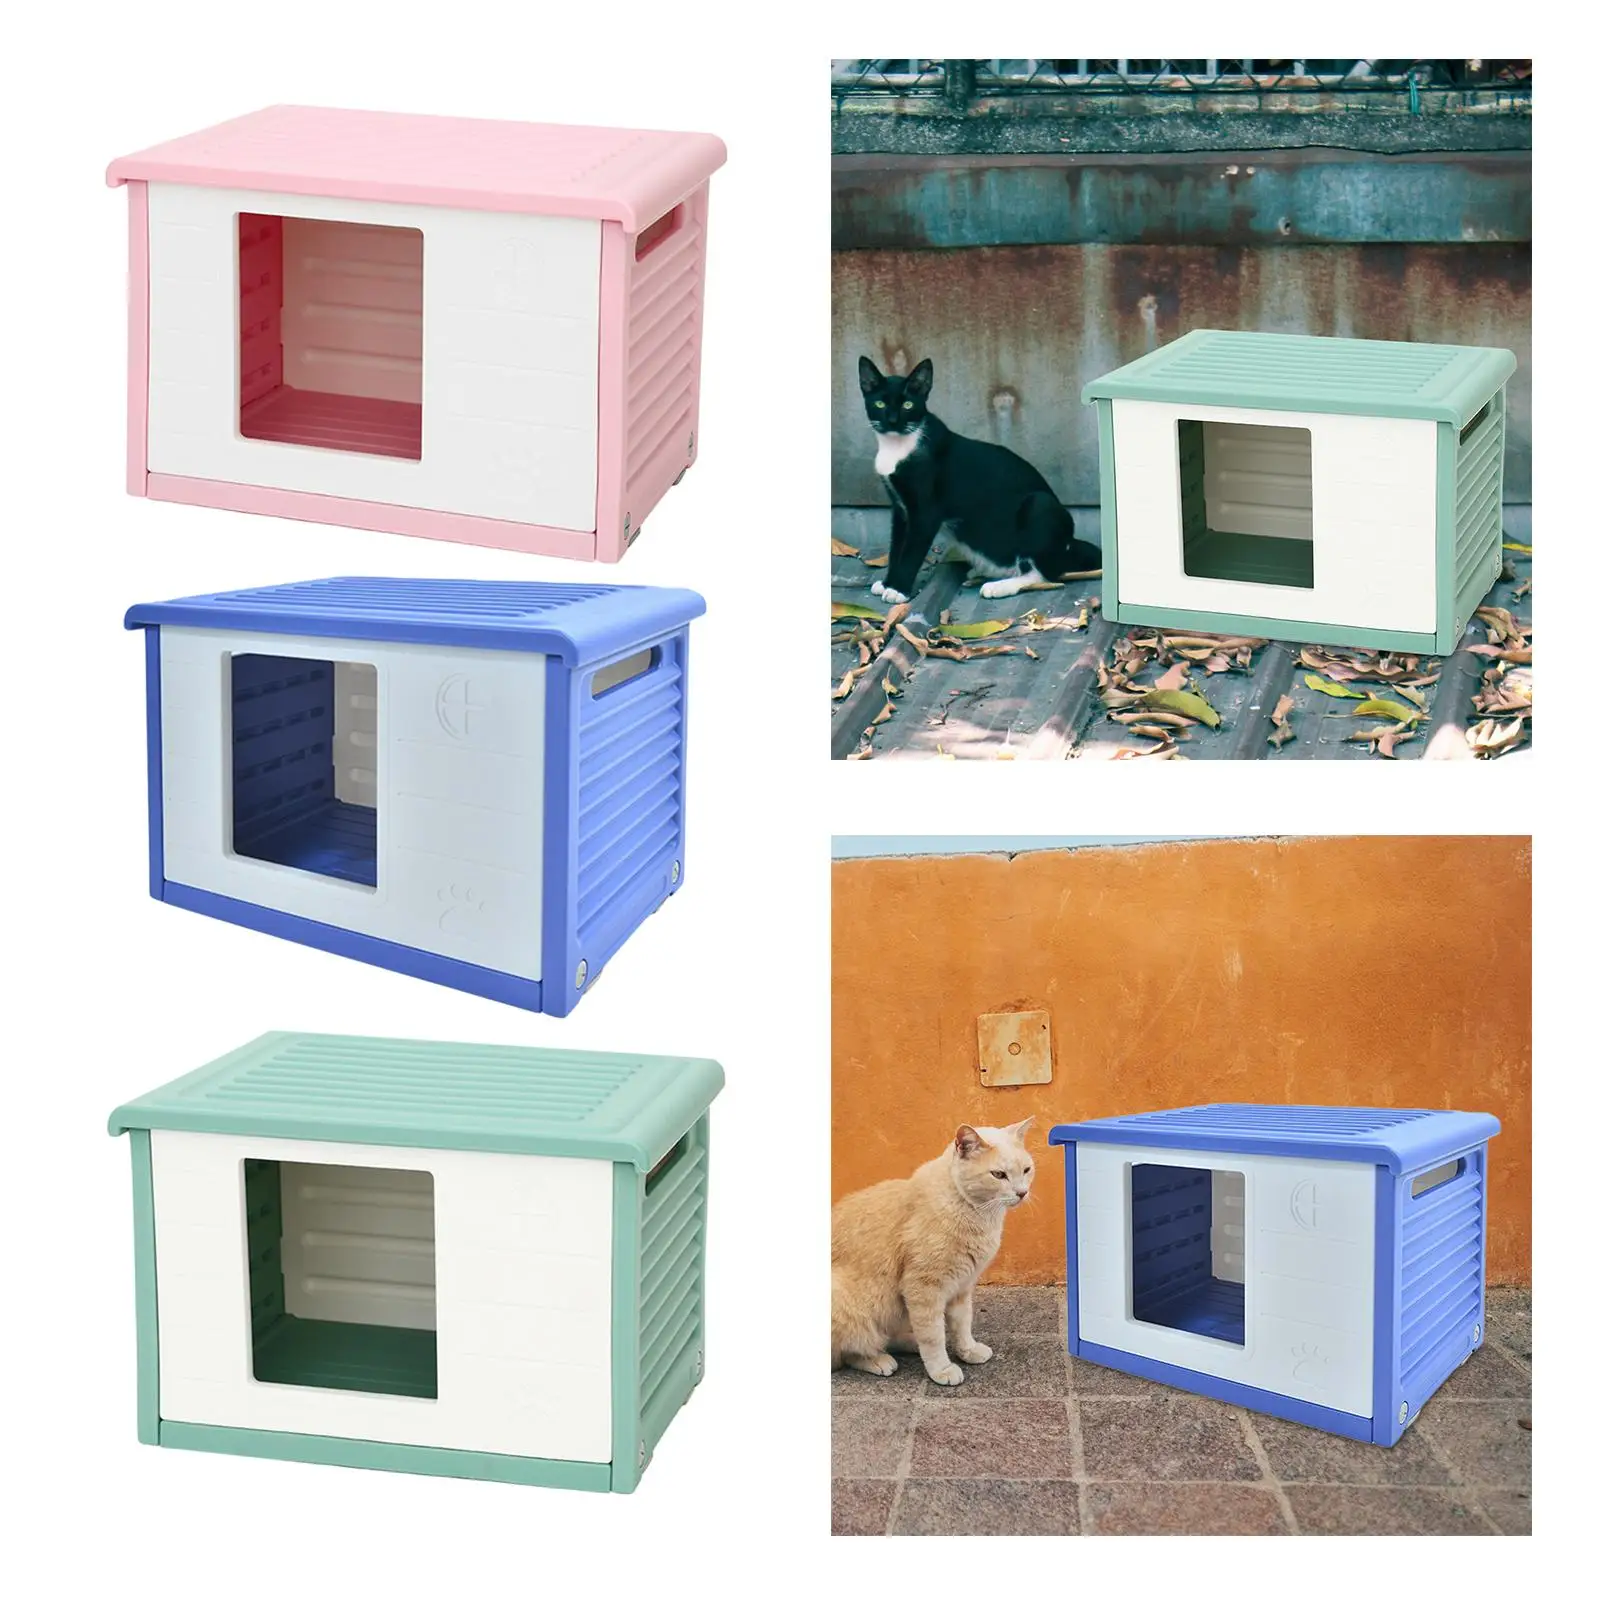 Stray Cats Shelter Habitats Furniture Bed Cave Portable Kennel Outdoor Cat House for Outdoor Cats Rabbit Small Dogs Puppy Kitten